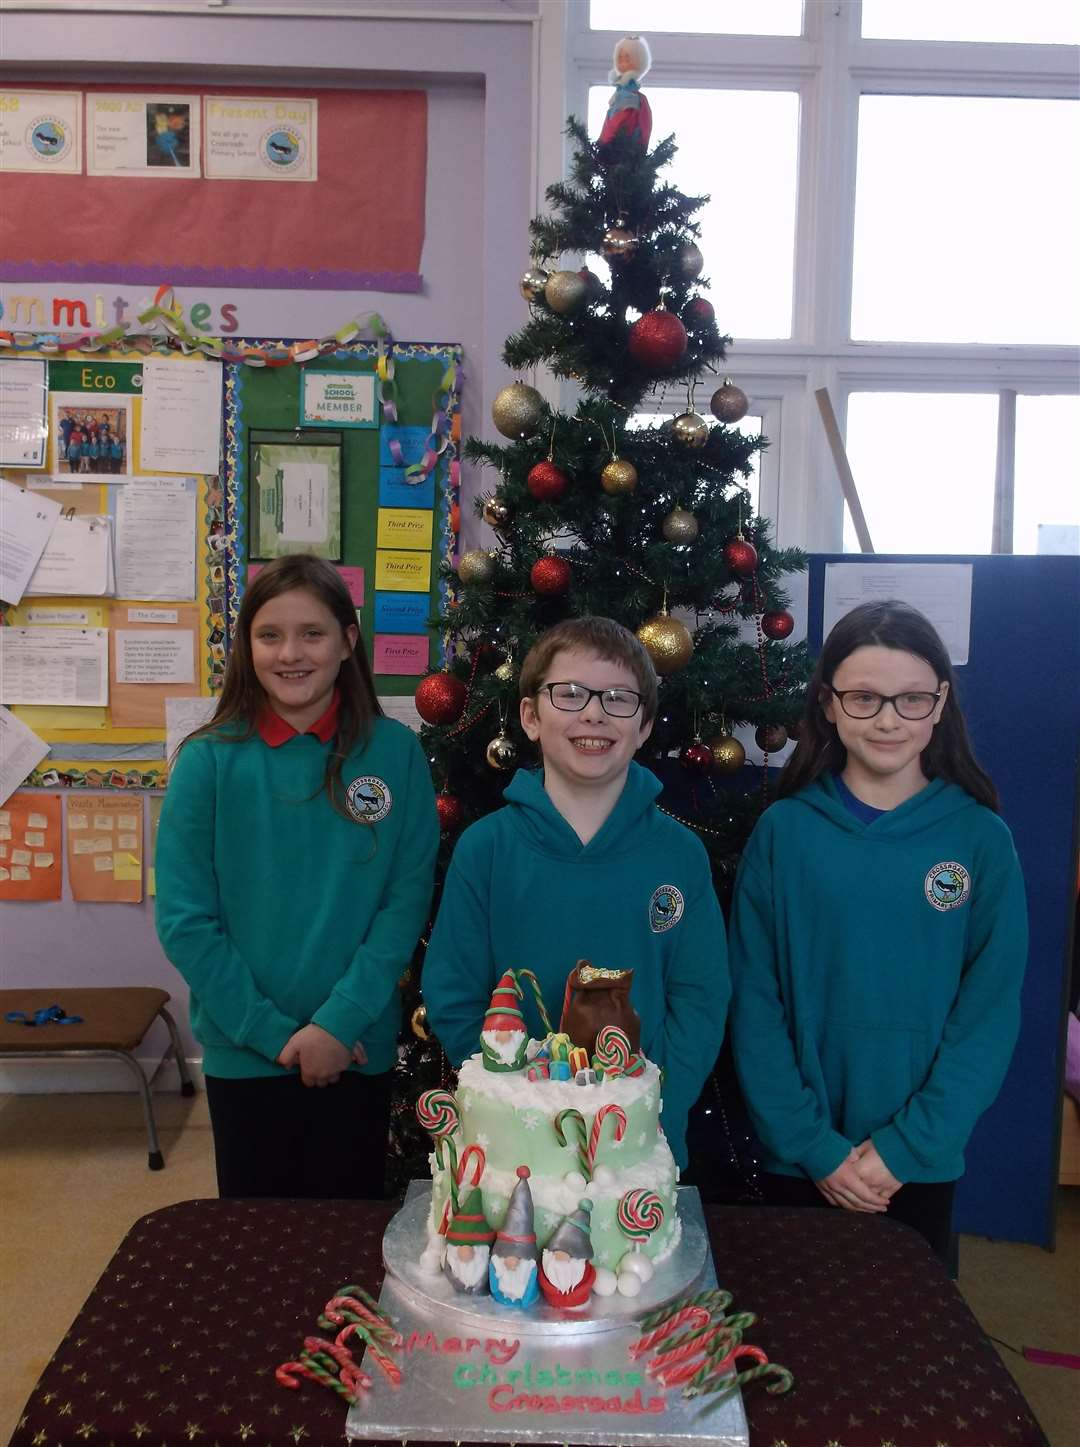 Primary 6 pupils Lana Myatt, Dylan Macdonald and Moira Darby with the royal Christmas cake which was delivered from King Charles.